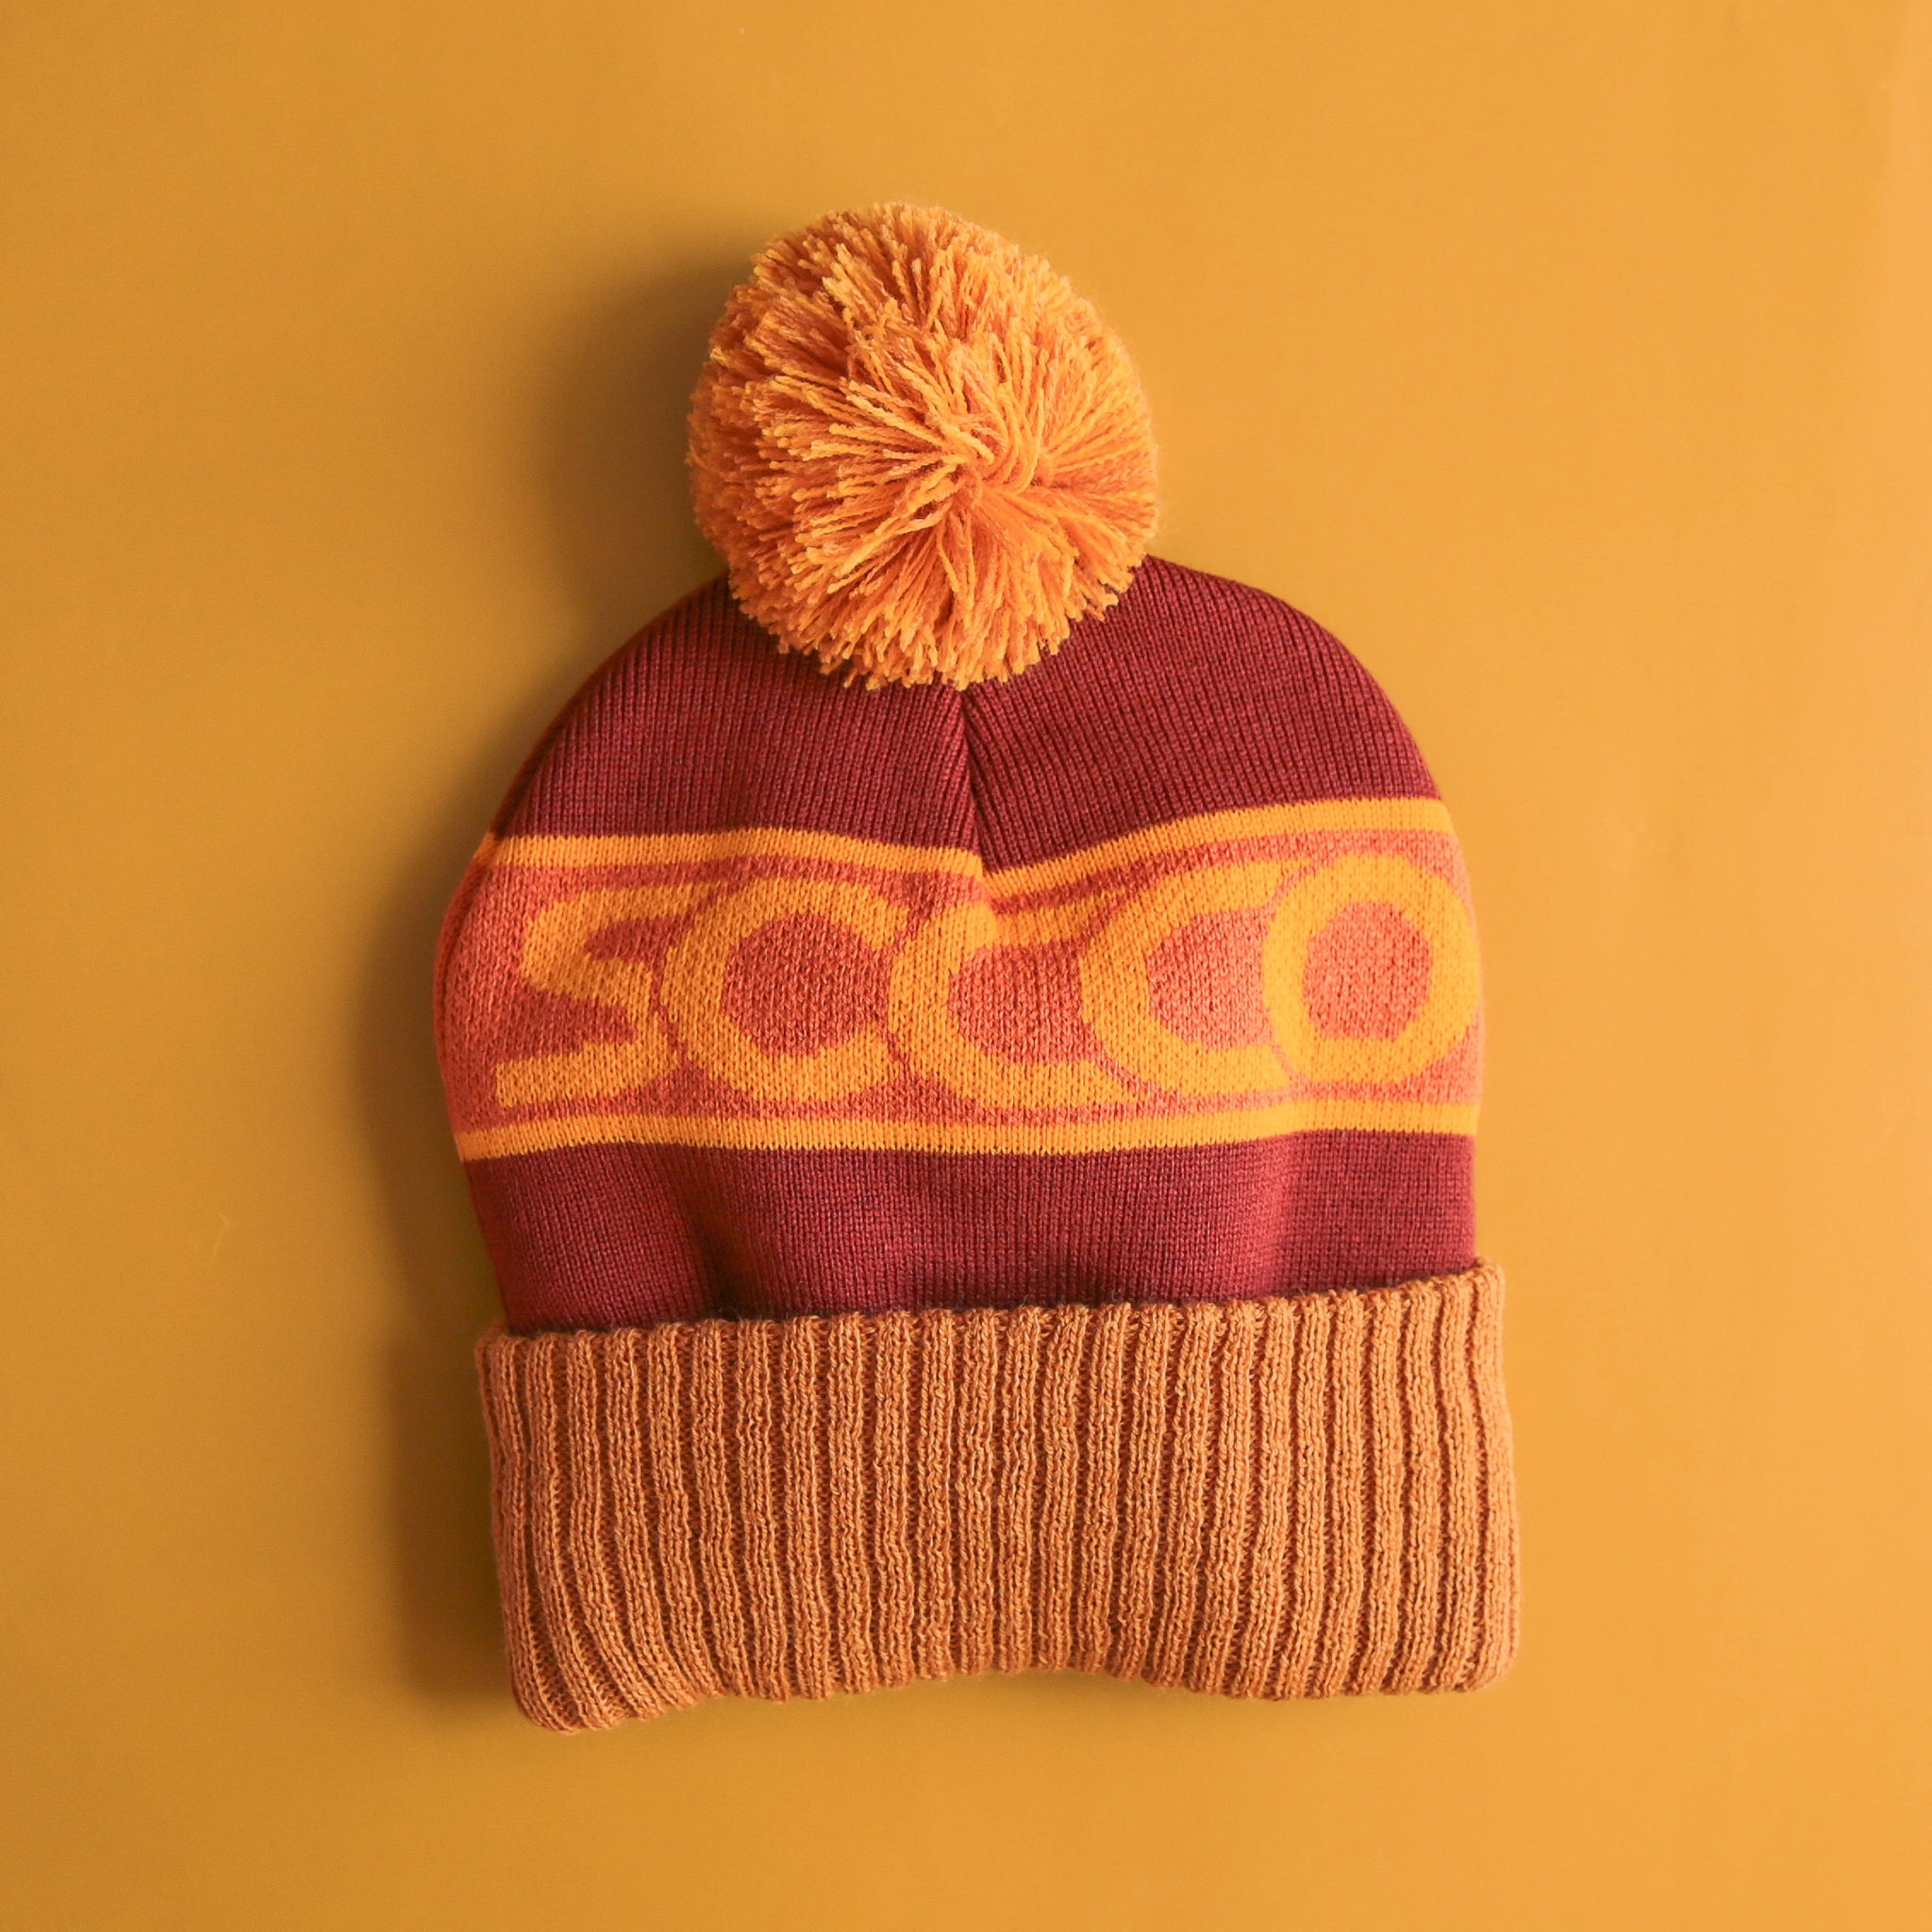 On a yellow background is a yellow and rust colored beanie with a pom pom on top and "SOCCO" written across the center. 